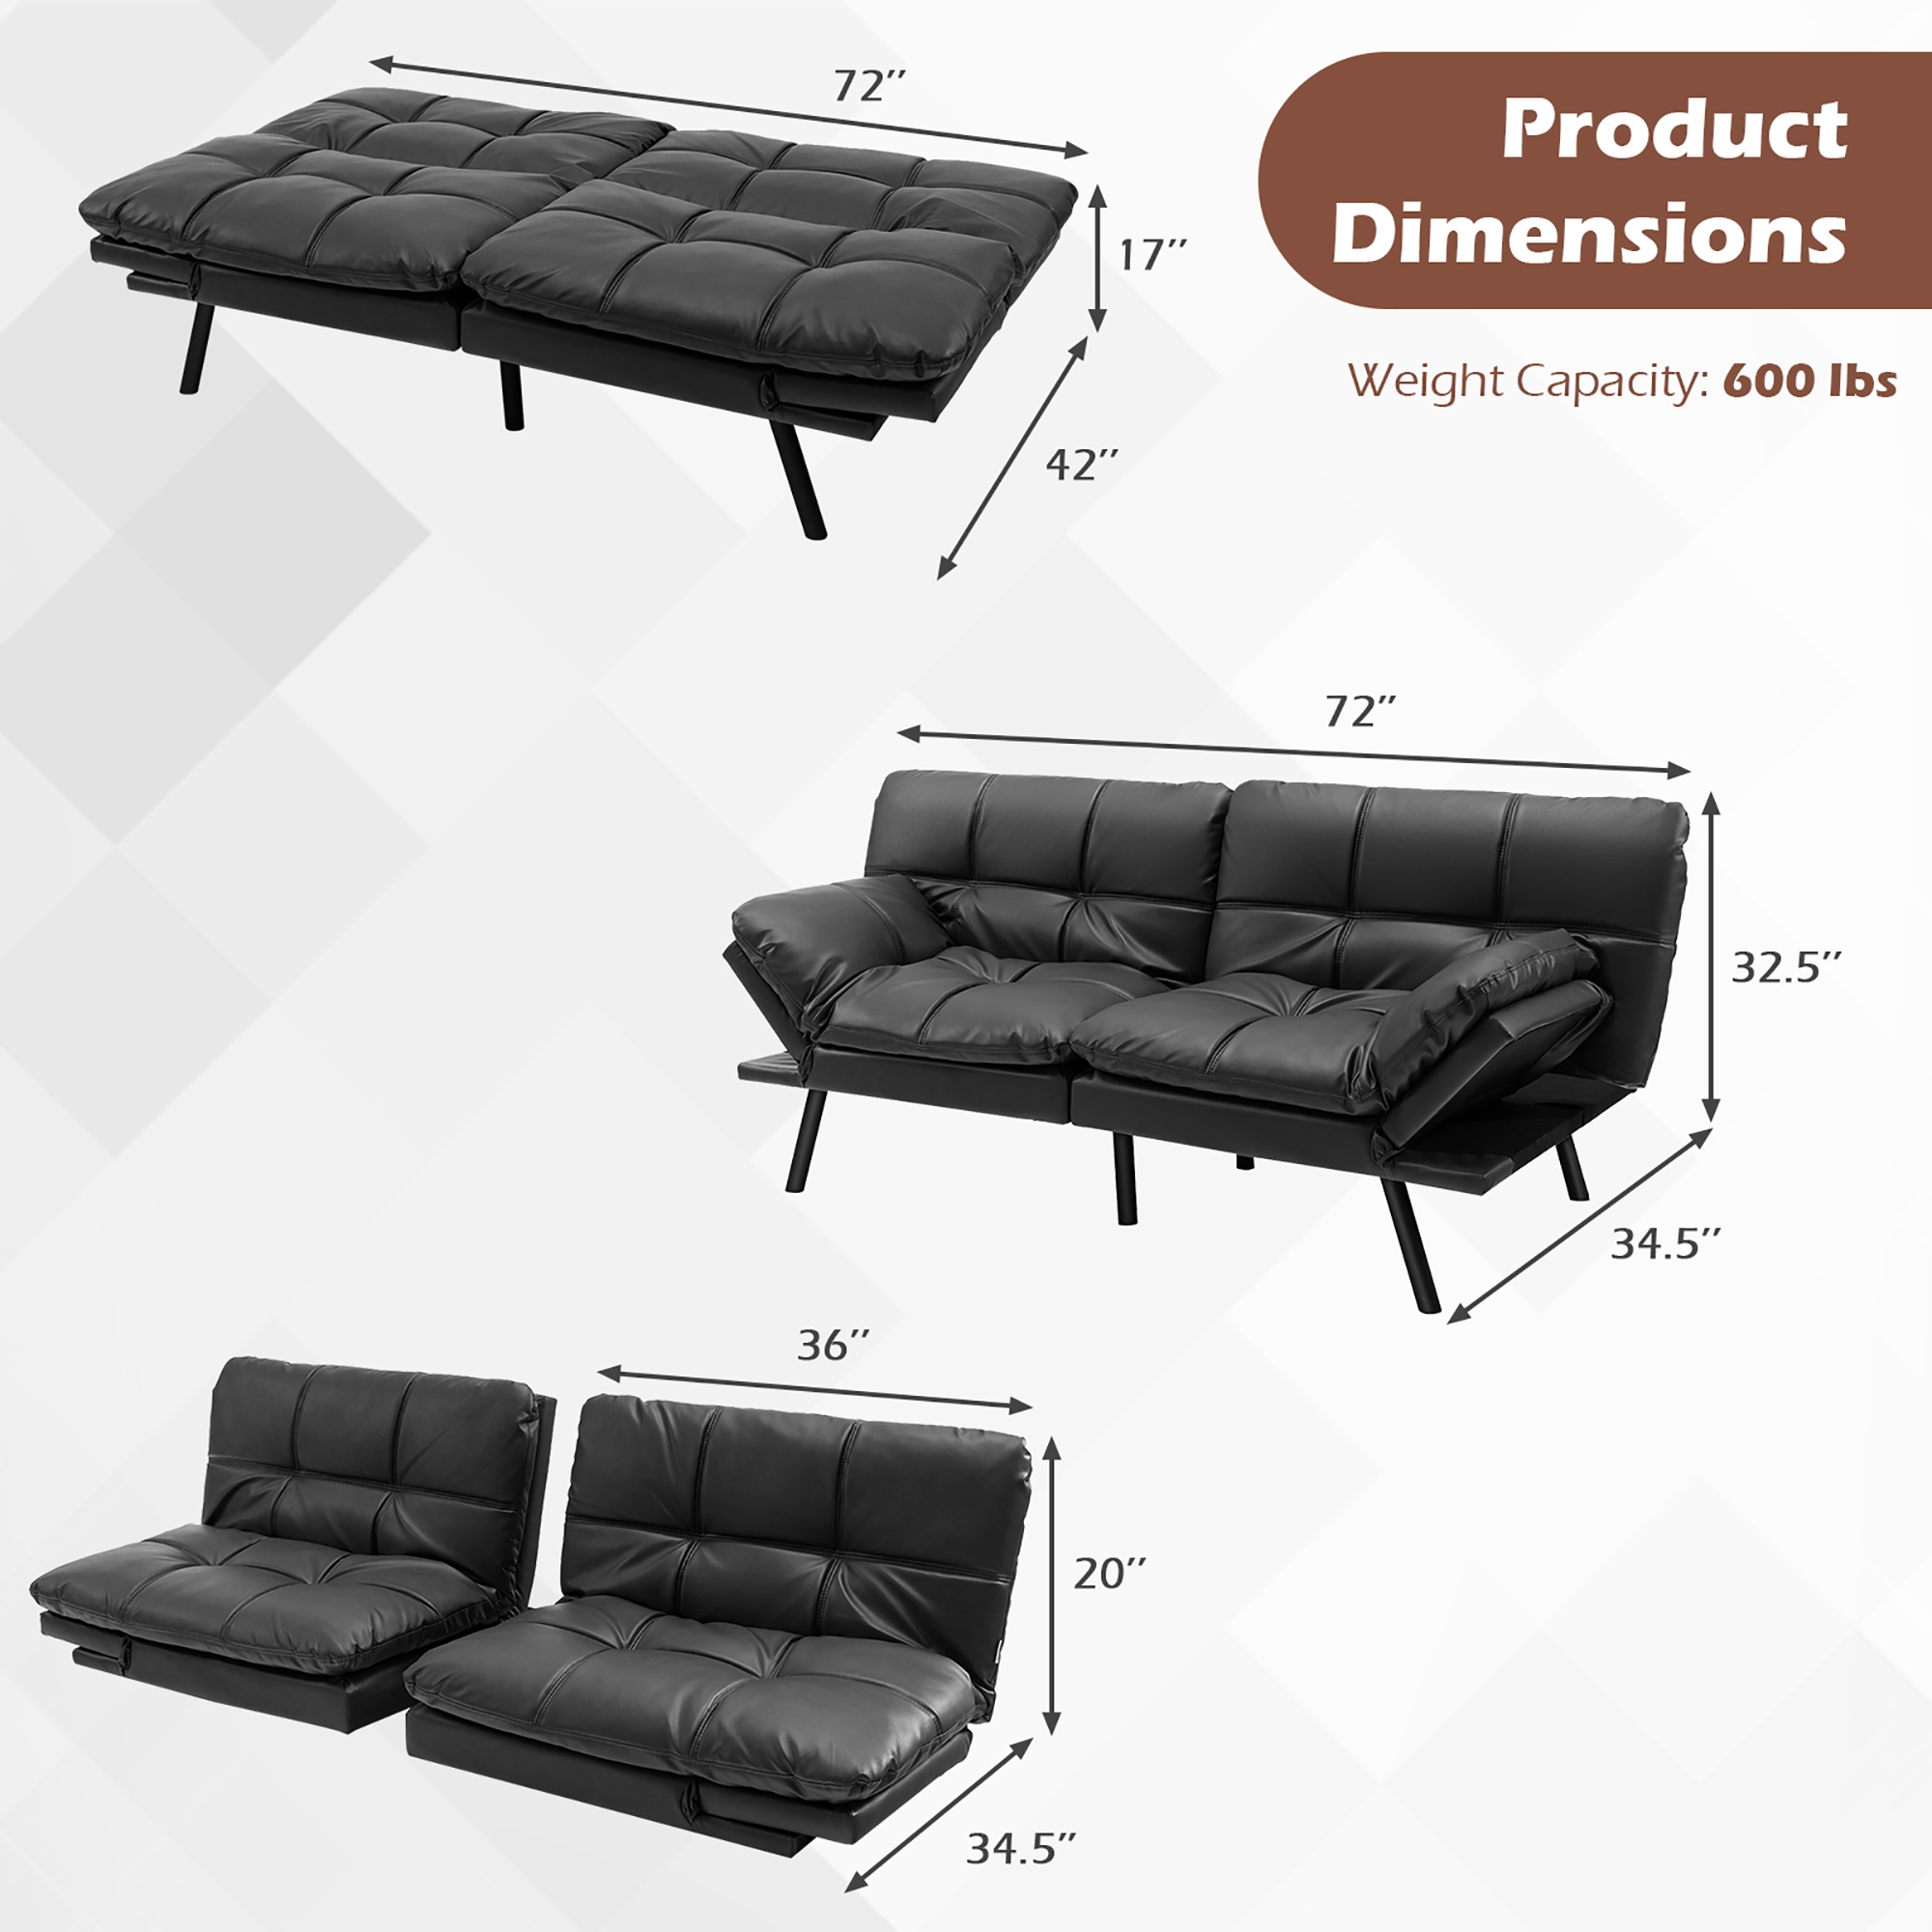 Costway Convertible Futon Sofa Bed Memory Foam Couch Sleeper with